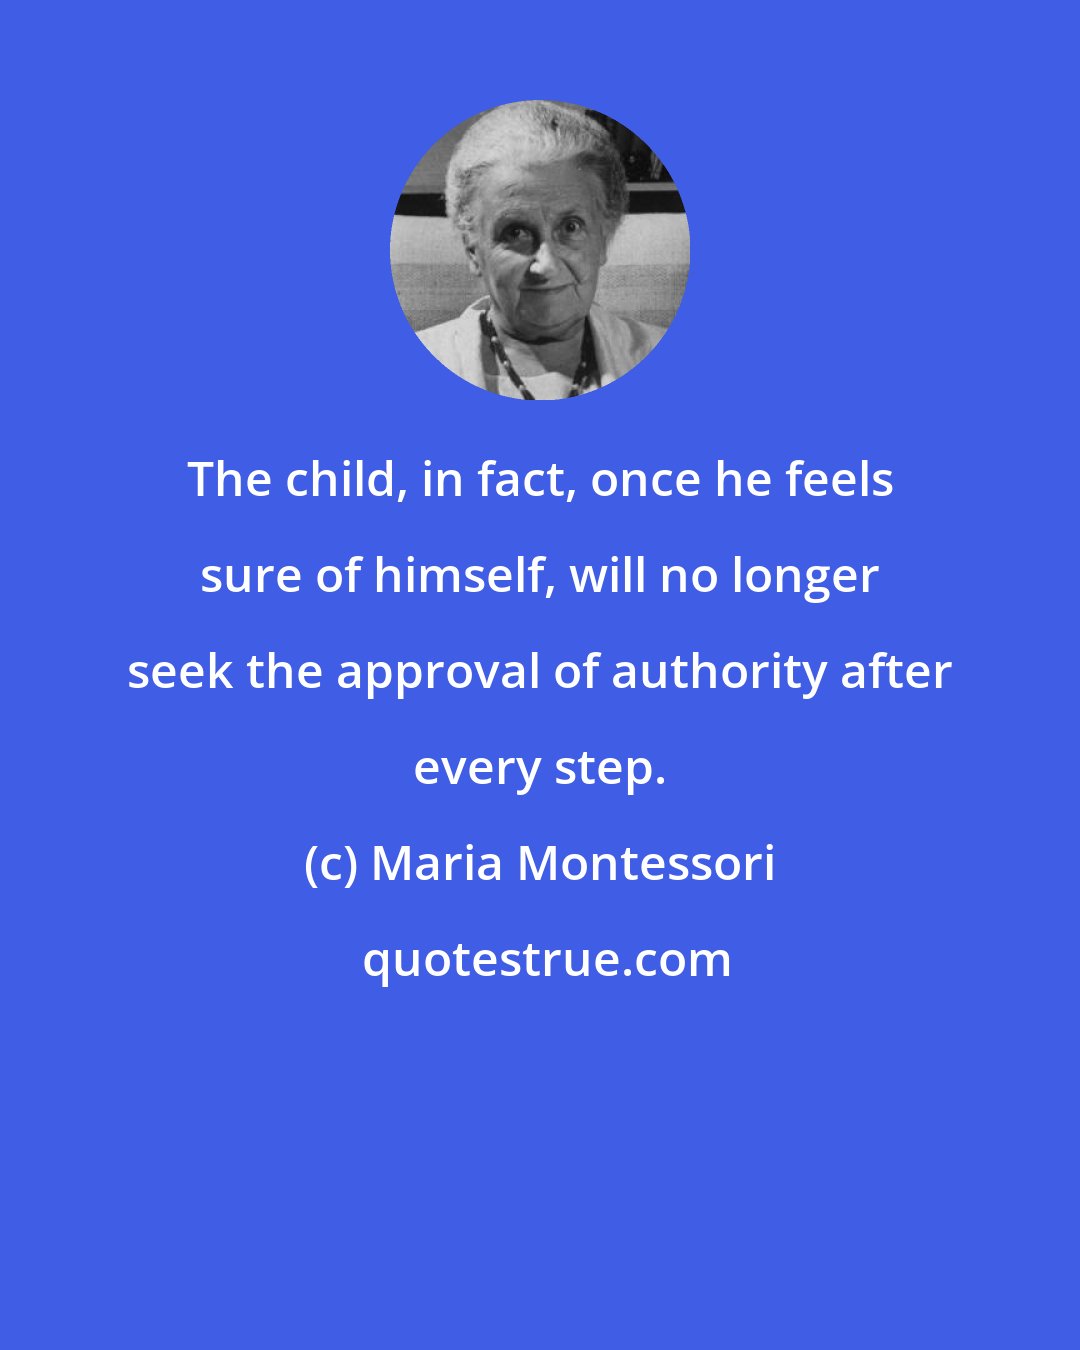 Maria Montessori: The child, in fact, once he feels sure of himself, will no longer seek the approval of authority after every step.